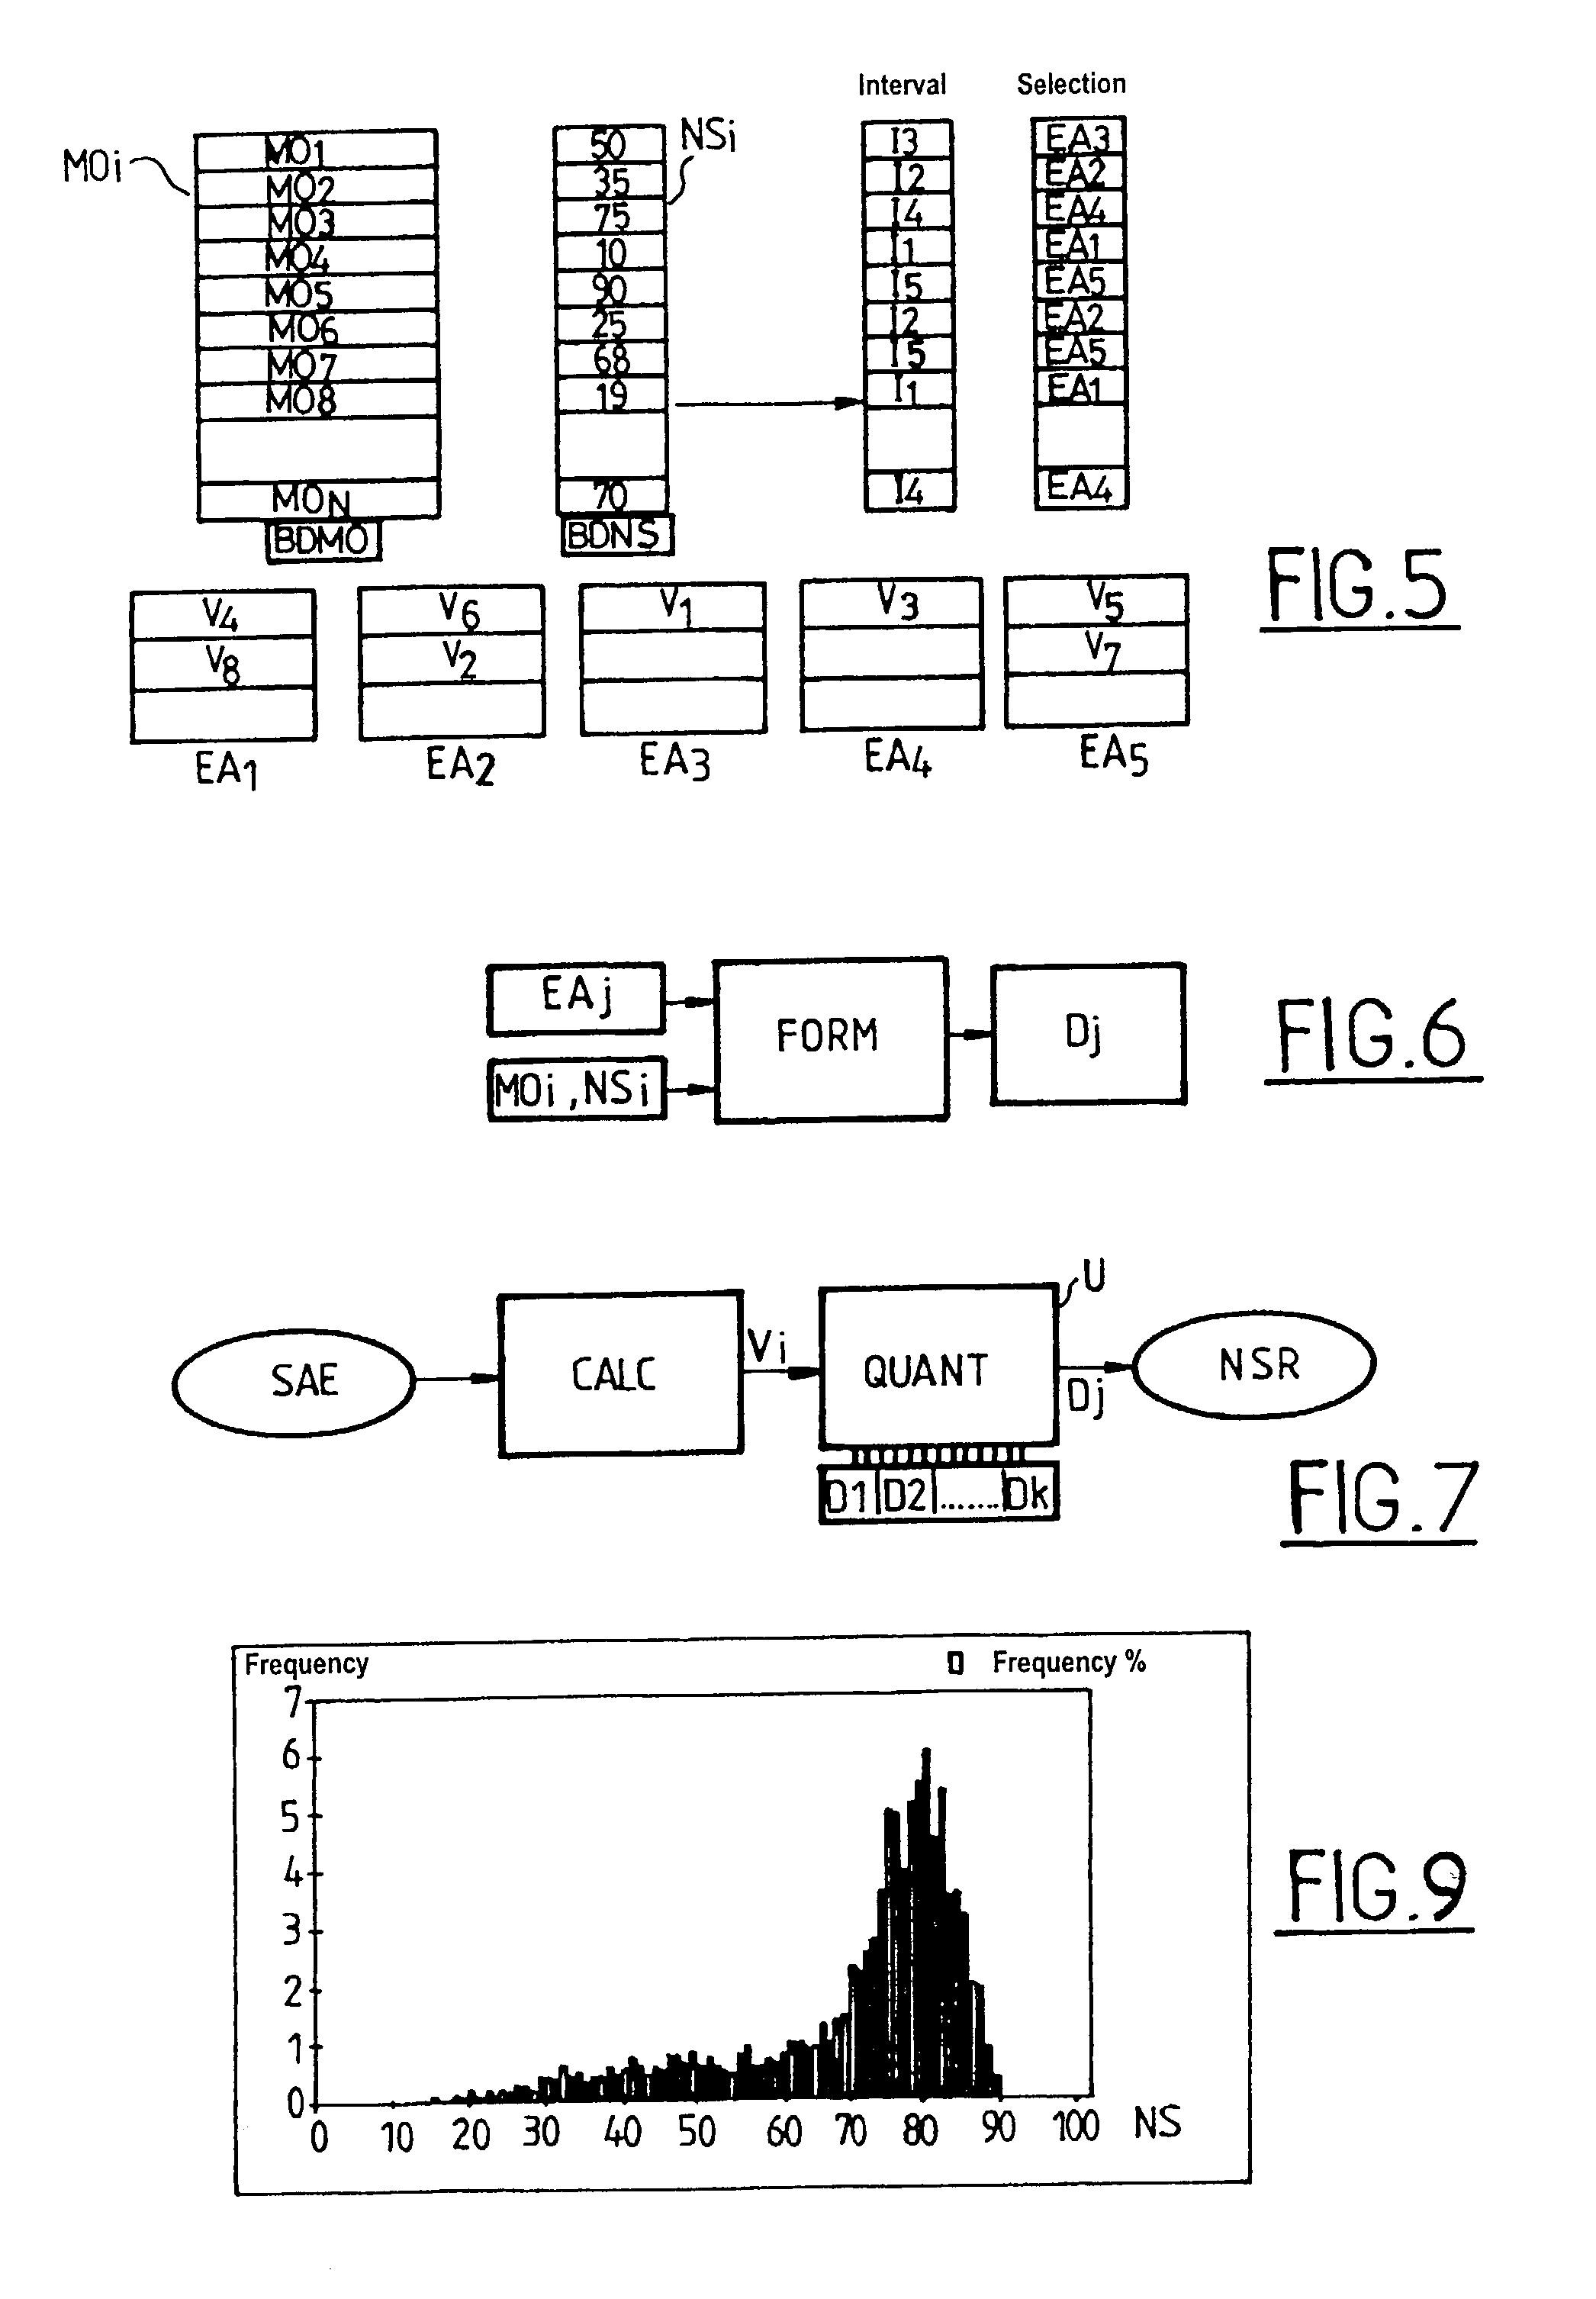 Method of evaluating the quality of audio-visual sequences